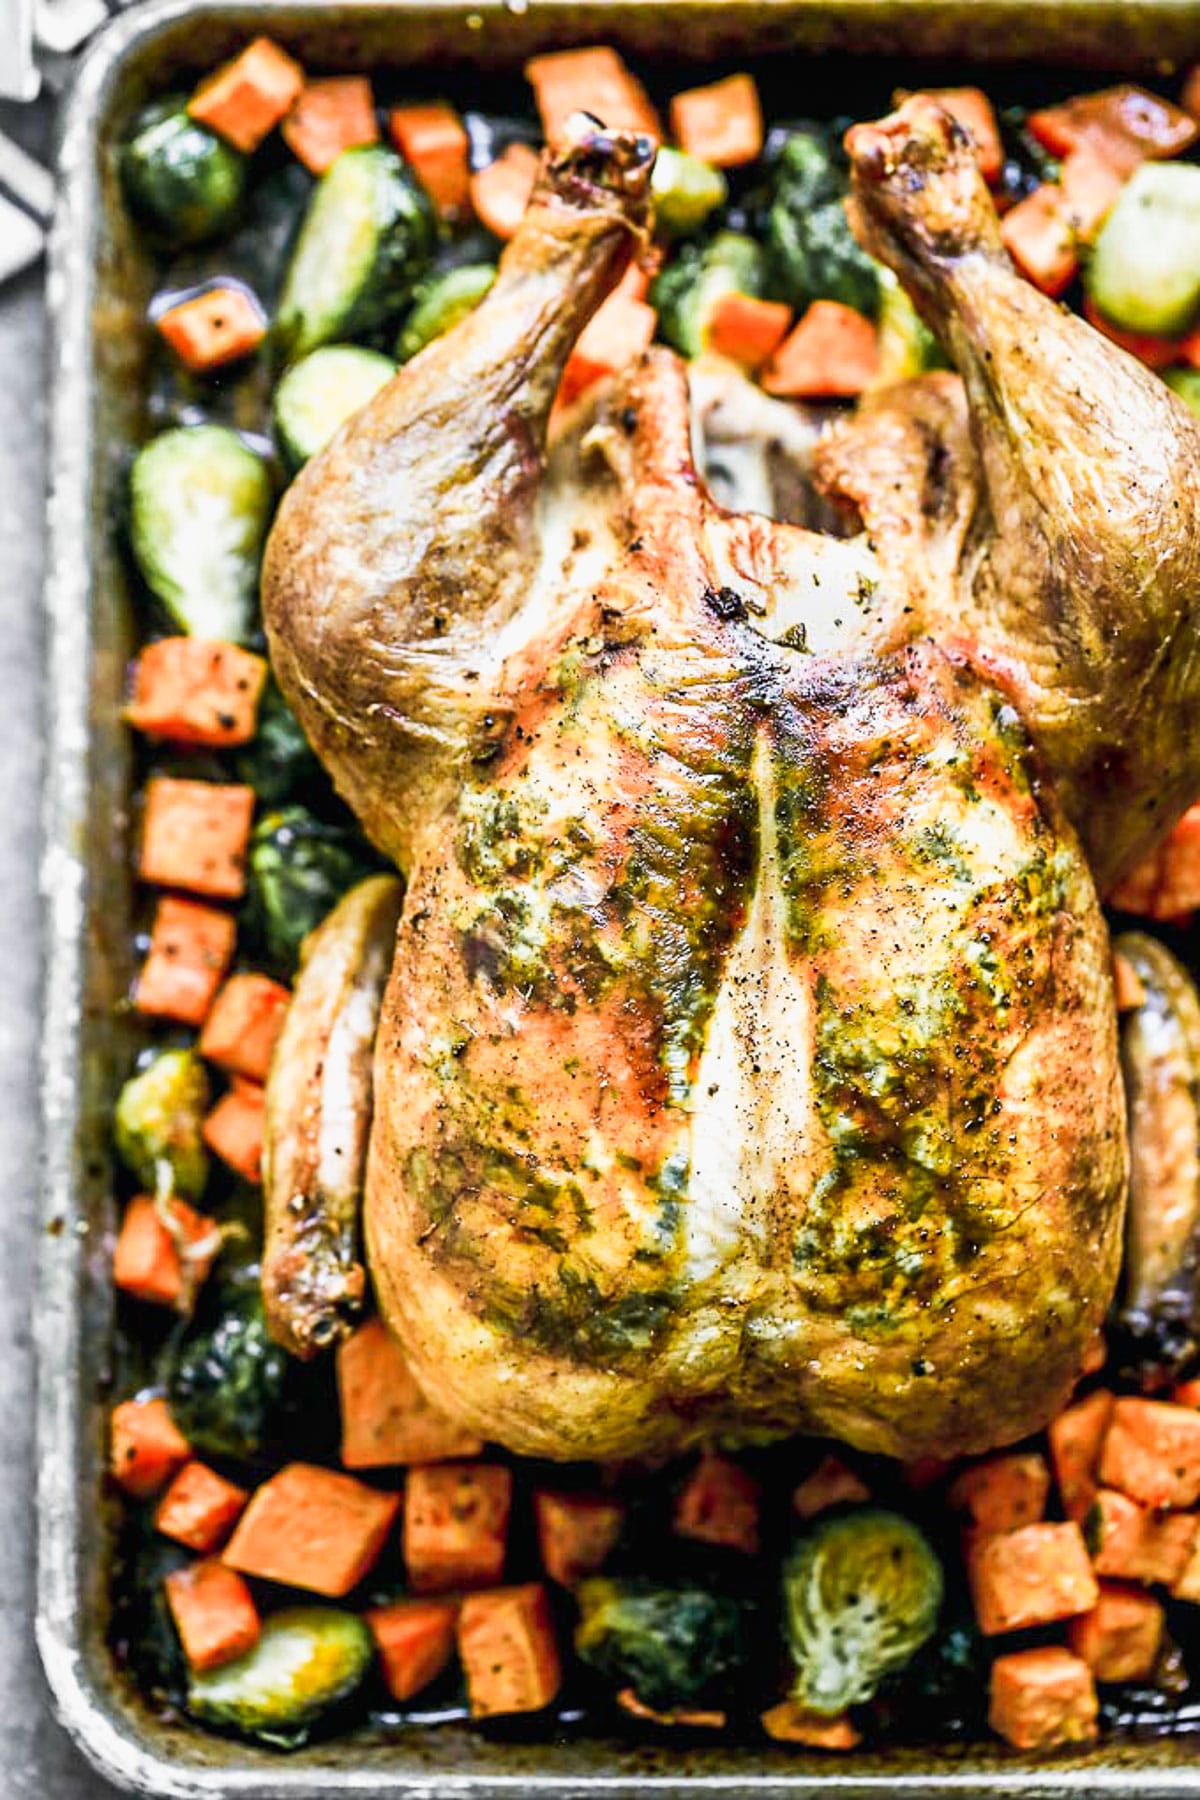 Our Crispy Roast Chicken is a cozy meal that's going to carry us through spring. We take a simple crispy roast chicken recipe and elevate it just a touch with an easy sage butter nestled under the skin, and a brown butter and sweet pomegranate juice glaze on top of the skin. We surround the chicken with hearty Brussels sprouts and sweet potatoes to make this easy meal come full circle.